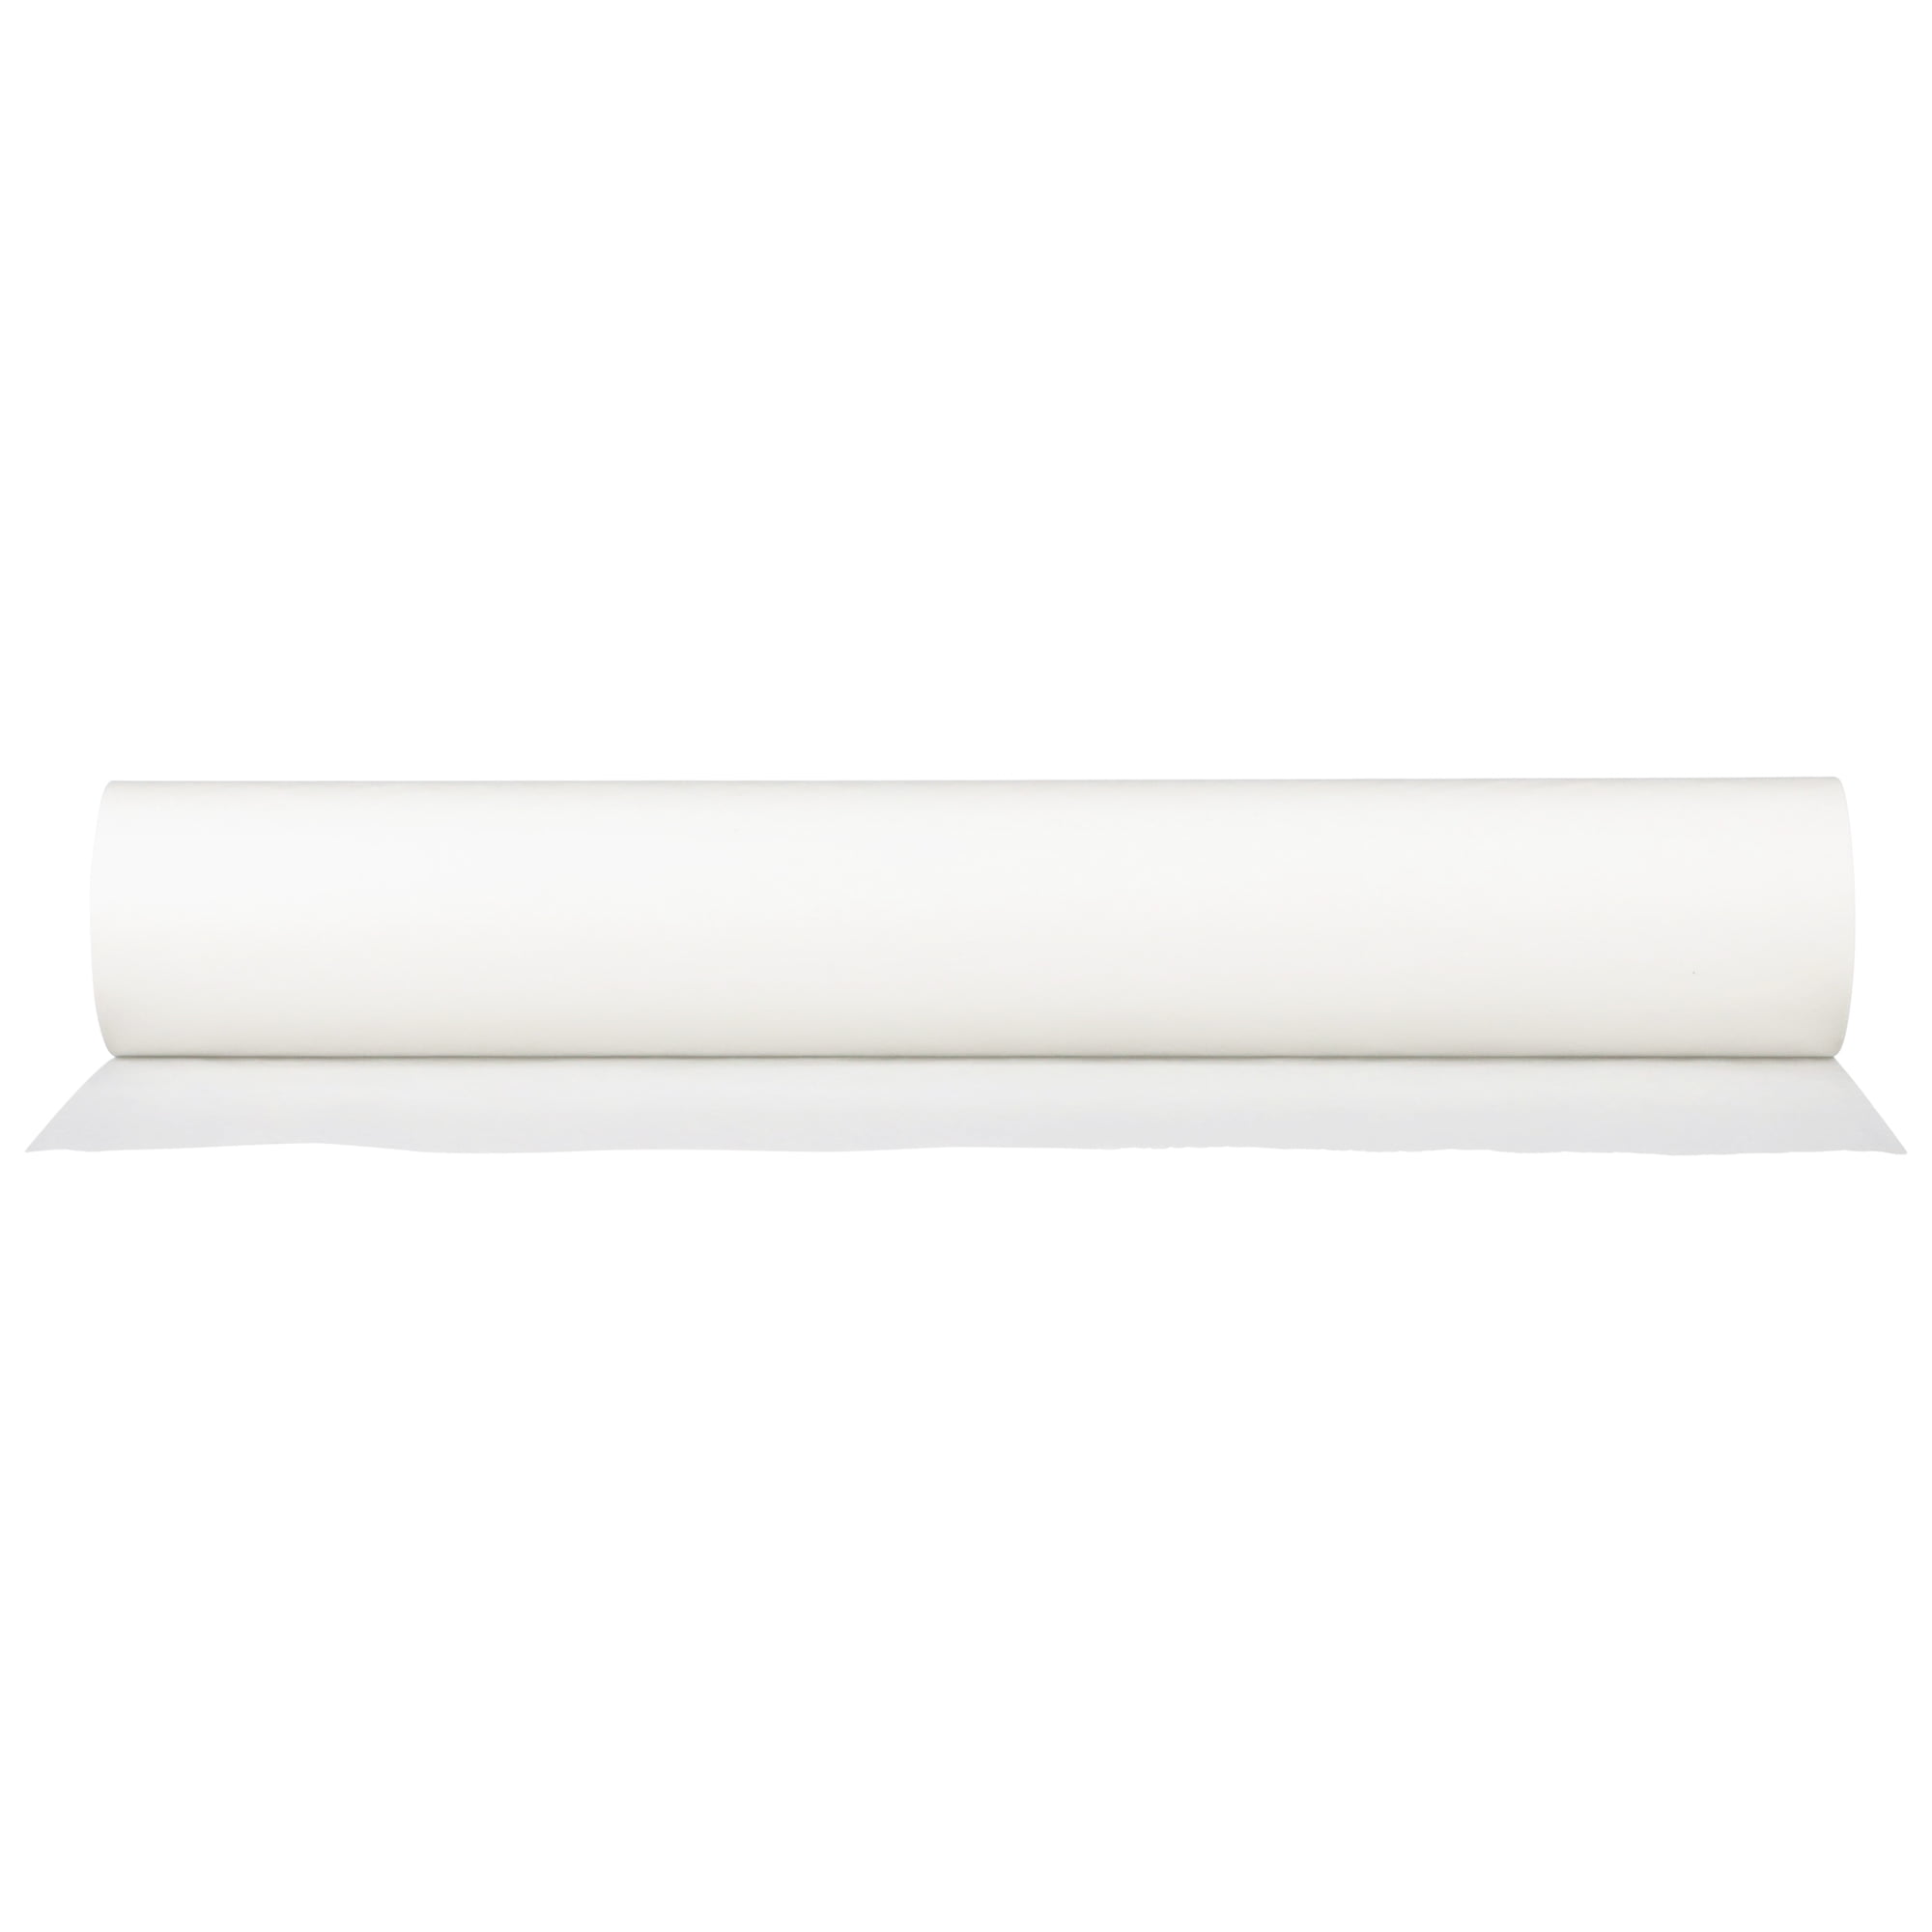 McKesson Table Paper White Smooth 21'' W x 225' L 12 Rolls, 12 ct - Smith's  Food and Drug